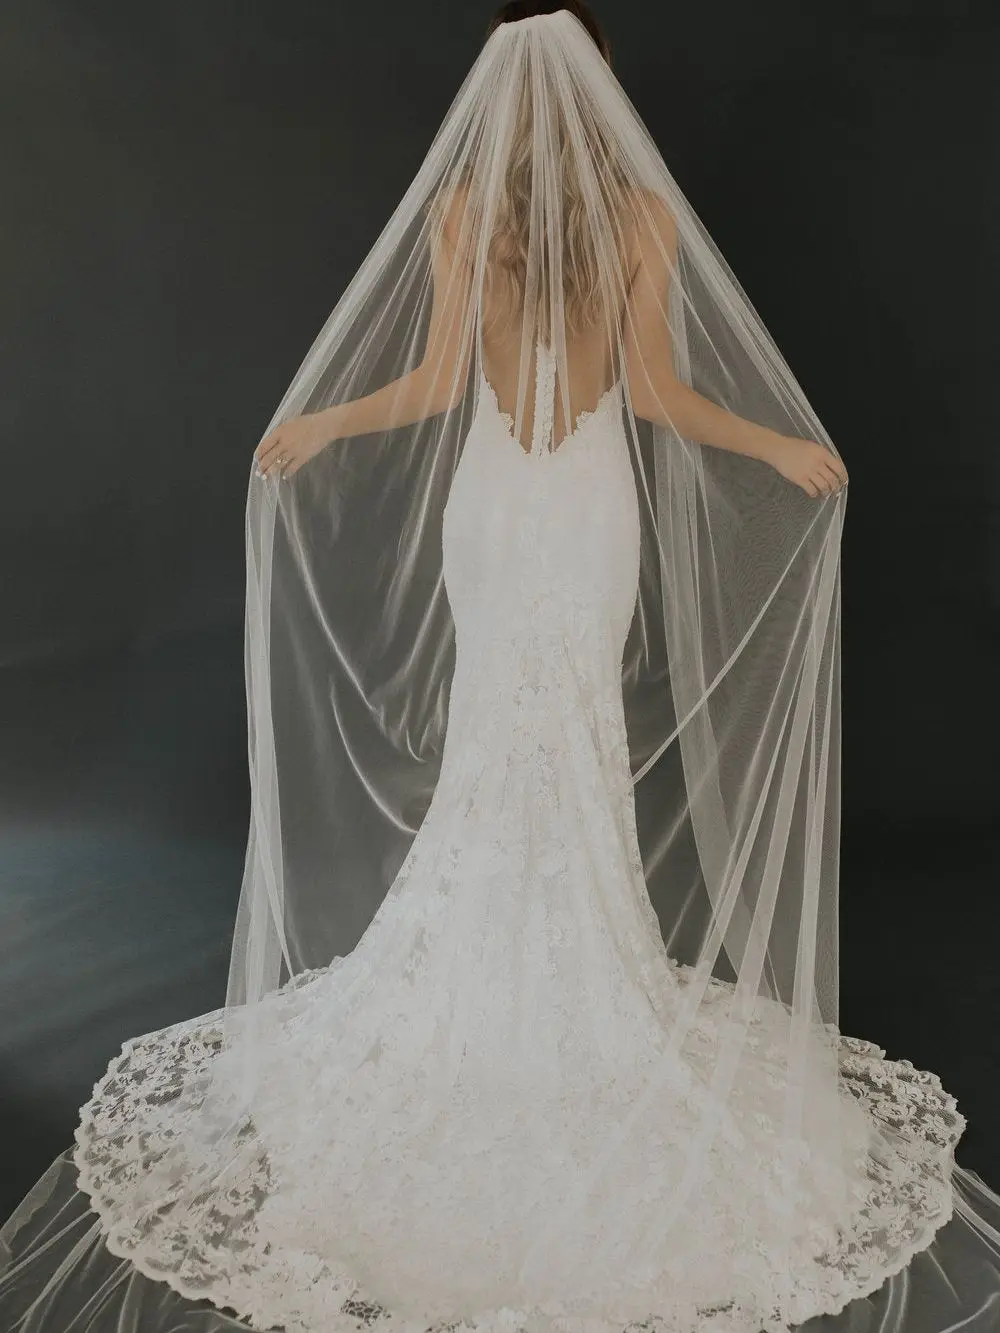 TOPQUEEN V30 Soft Single Tier Bridal Veil with Cut Edge Real Photos Long 3M Cathedral Wedding Veil Sheer Italian Tulle Veil simple ribbon edge wedding veils for brides 2023 long drop two tiers veil for women with comb soft tulle wedding طرحة العروس